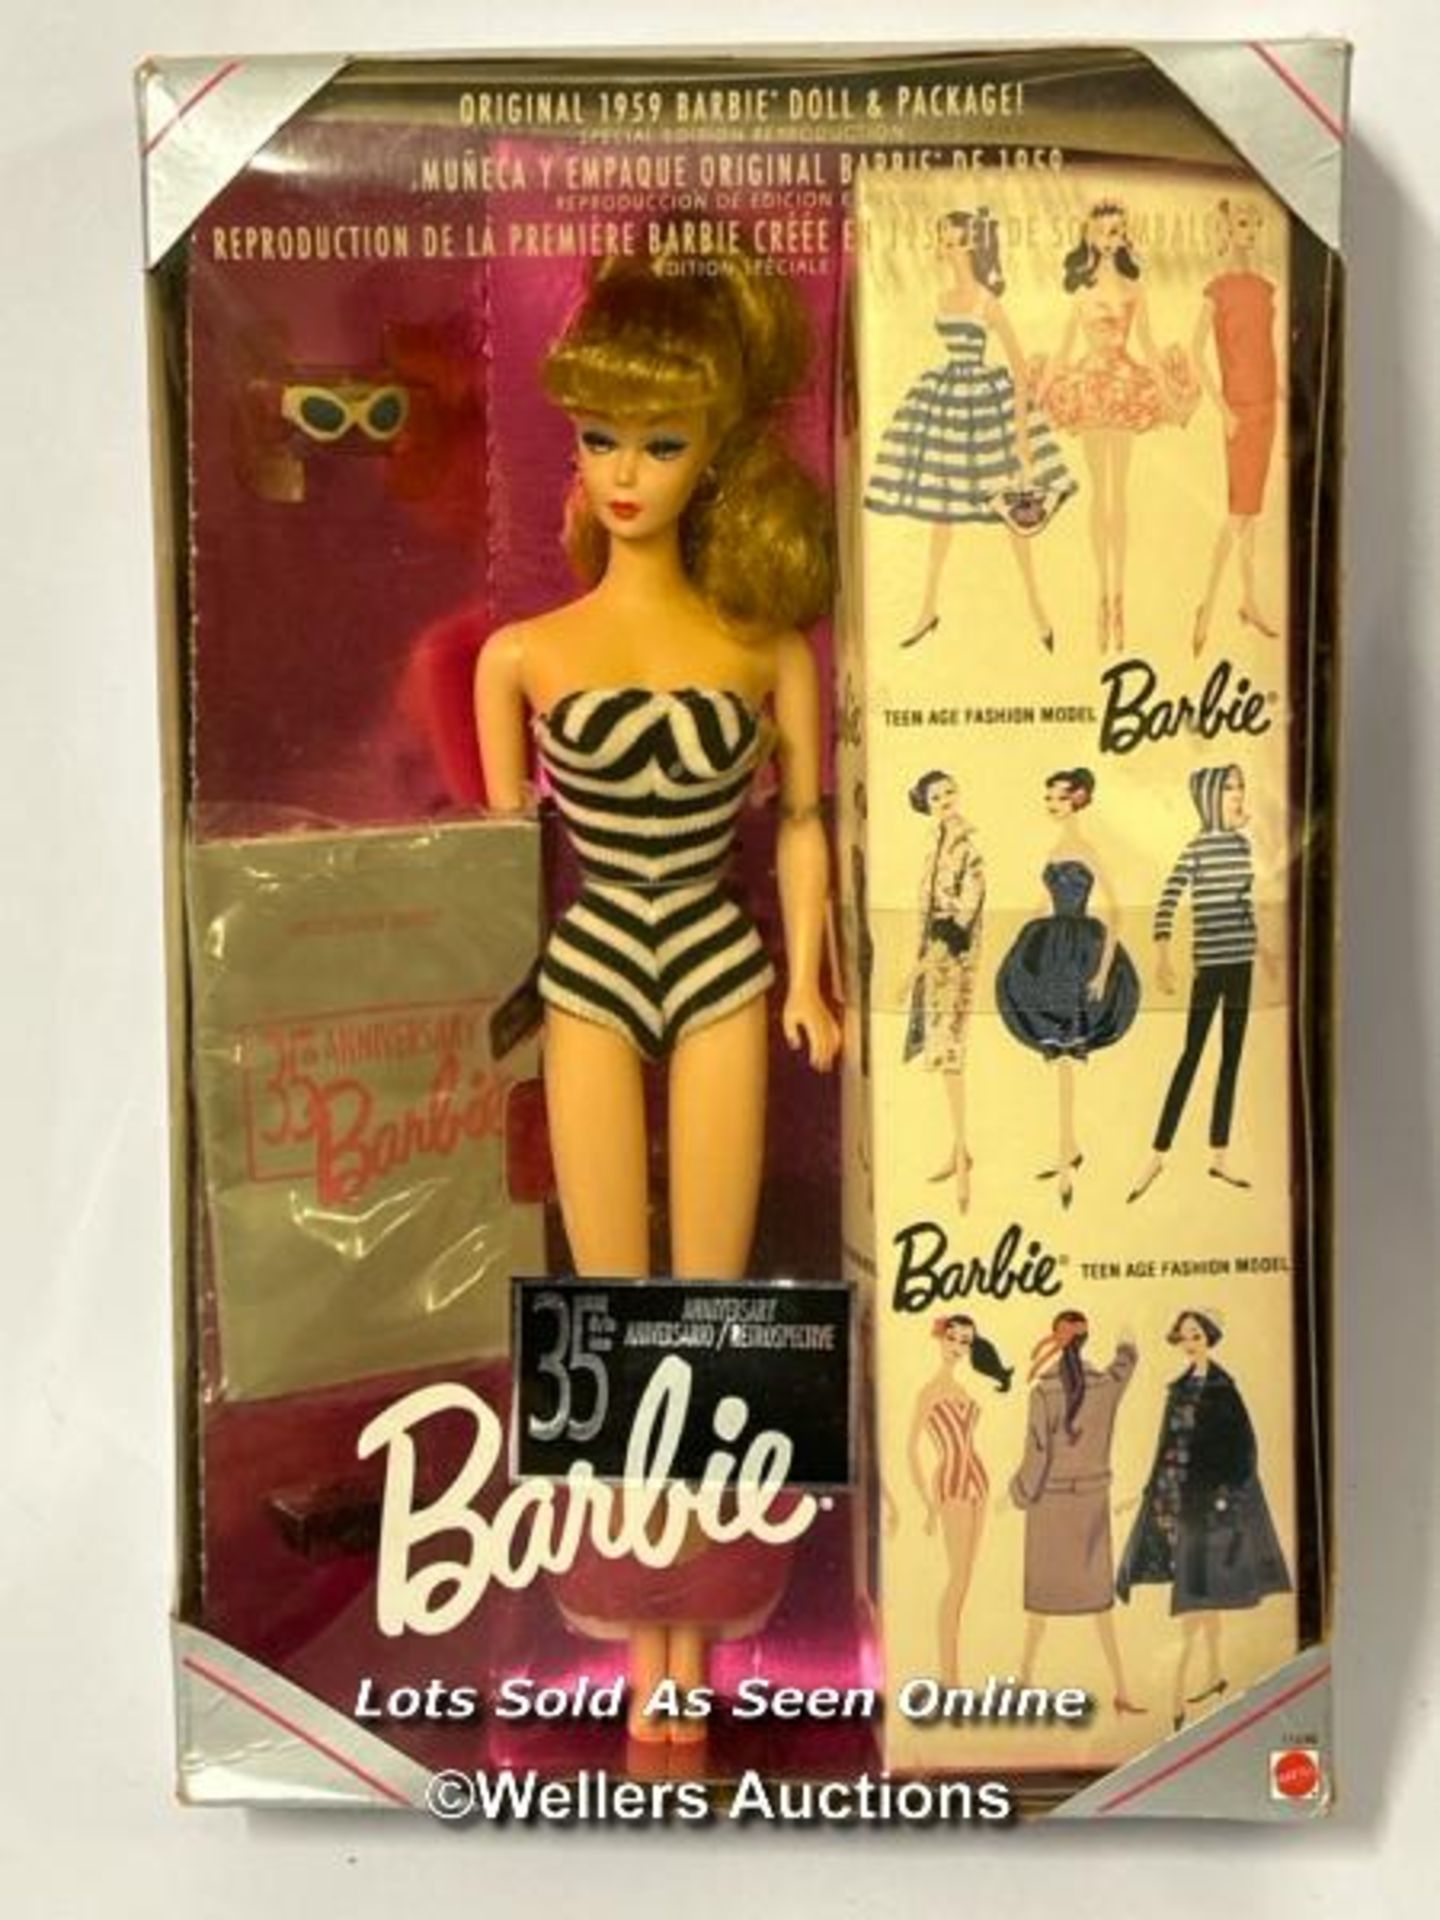 Barbie Collector, Farrah Fawcett doll V7161, 2010 and 30th Anniversary doll 11590, 1993, both - Image 4 of 5